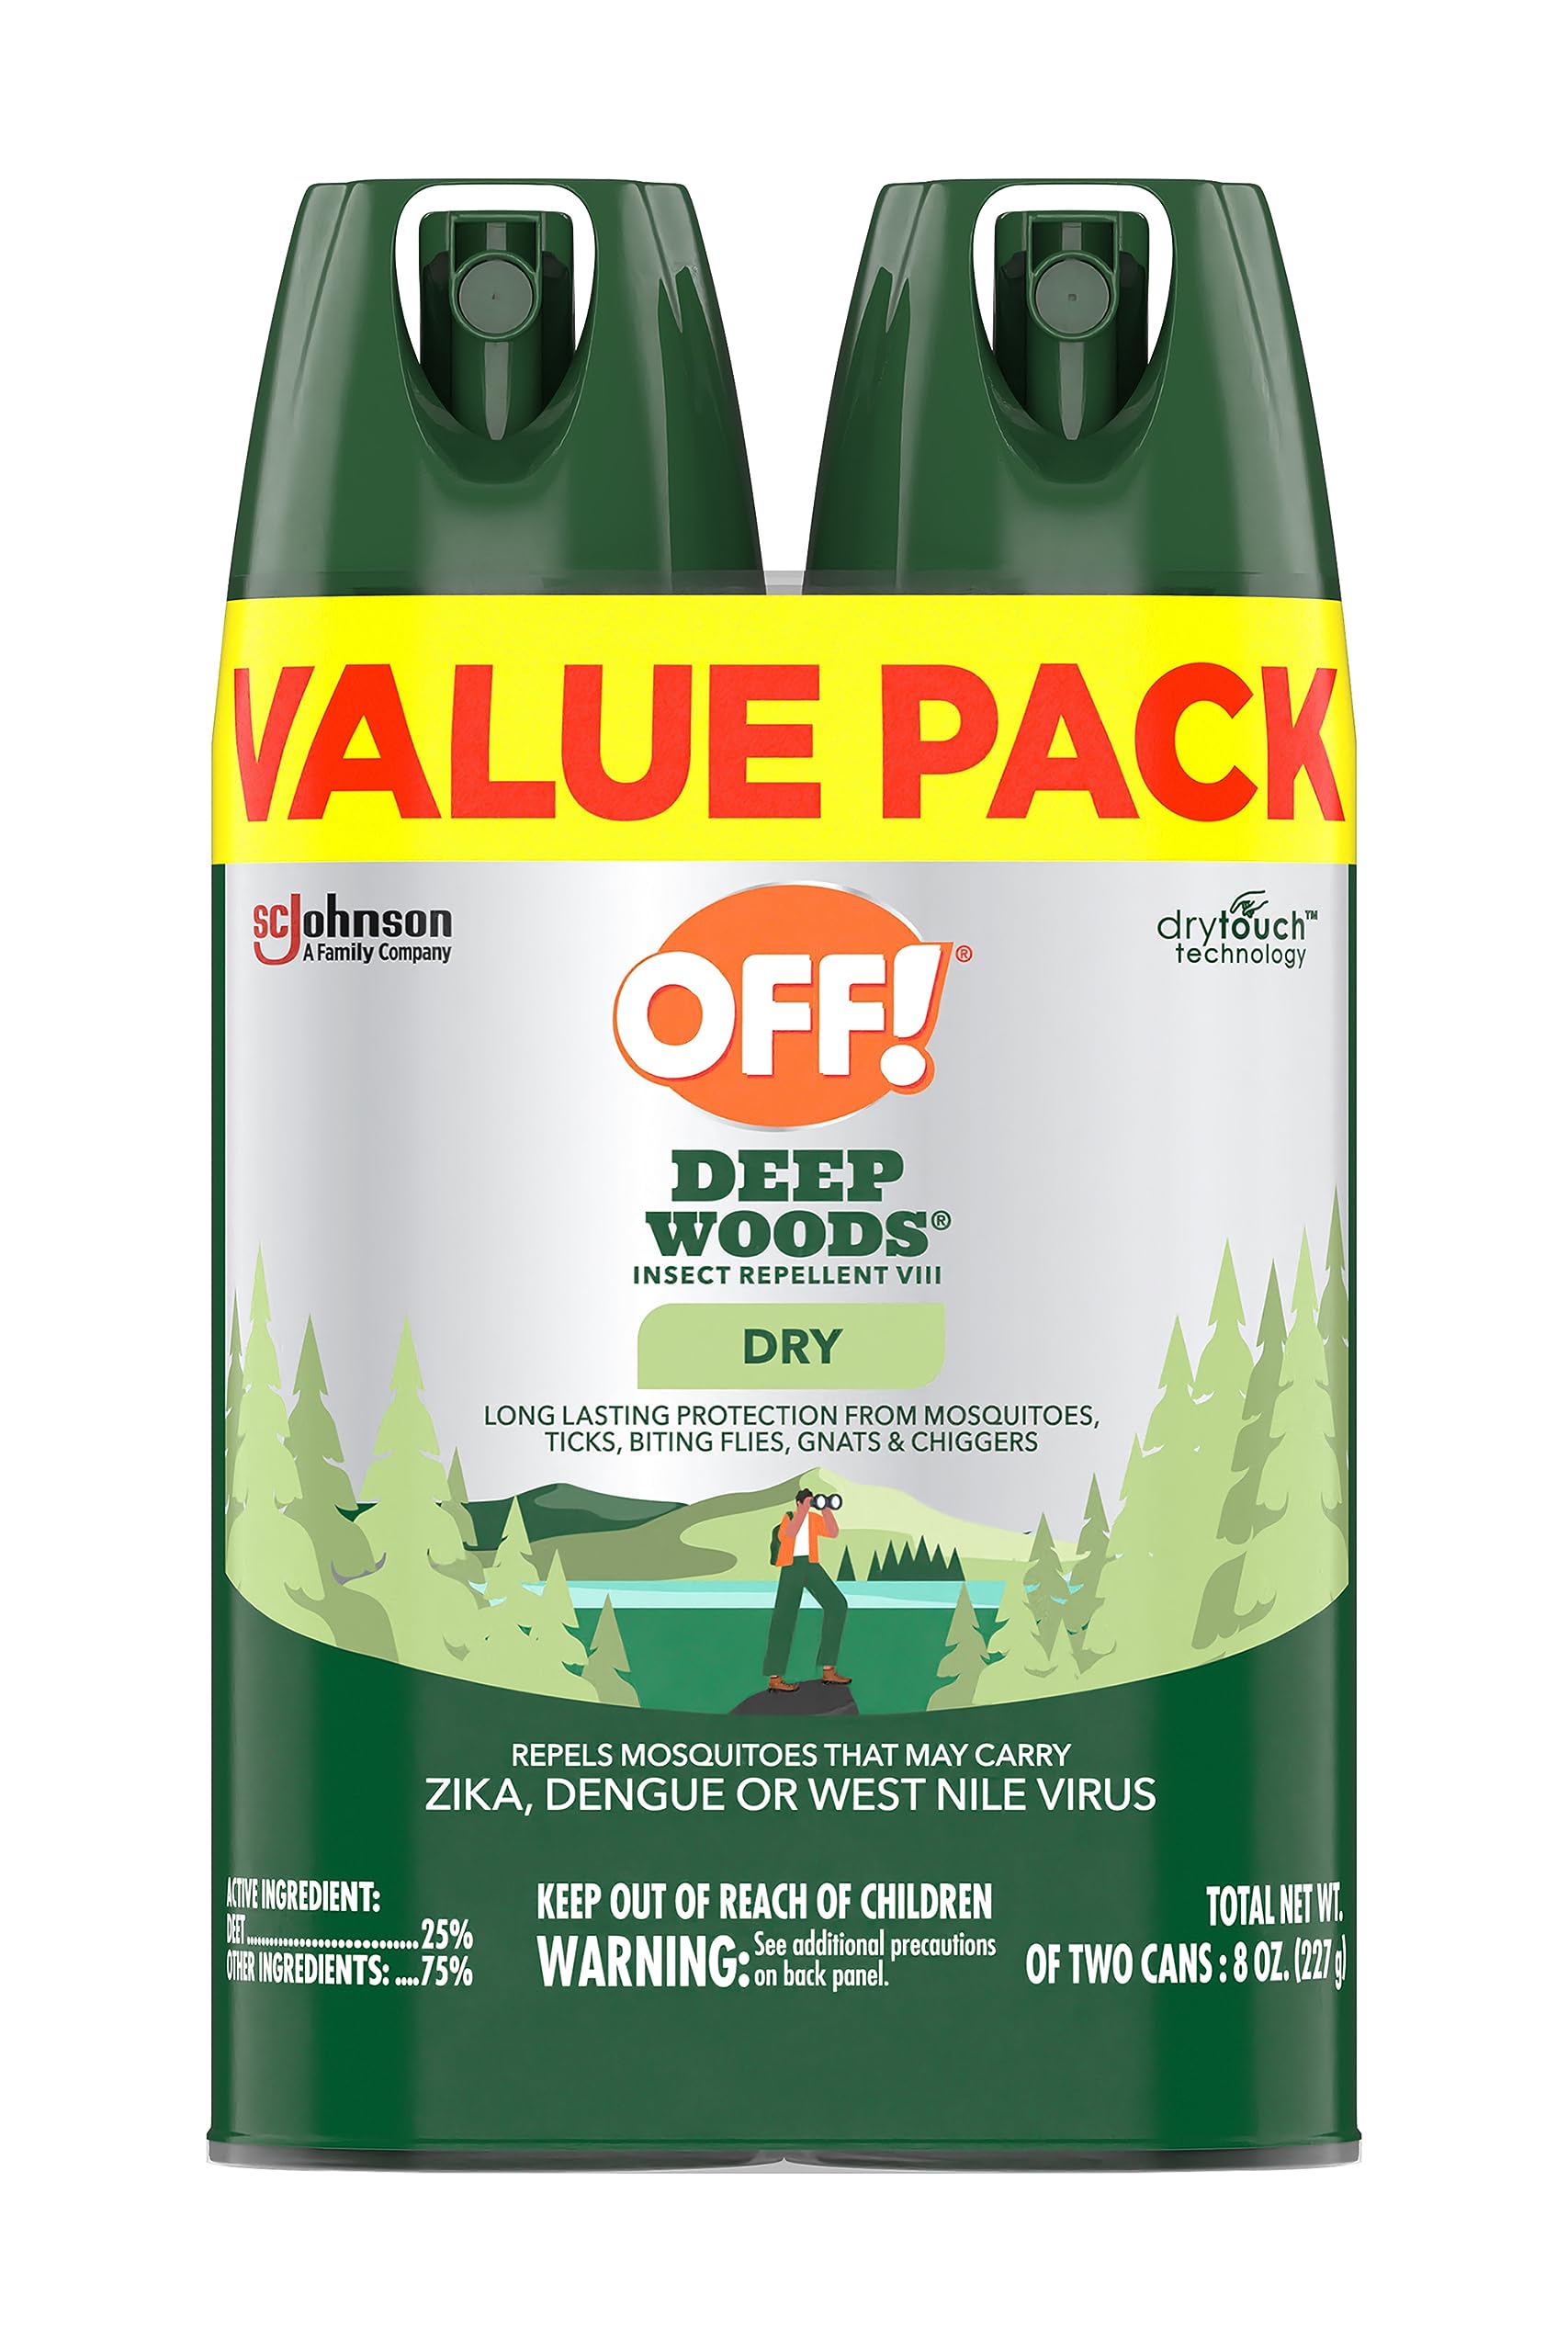 OFF! Deep Woods Insect Repellent Aerosol, Dry, Non-Greasy Bug Spray with Long Lasting Protection from Mosquitoes, 4 oz, 2 ct